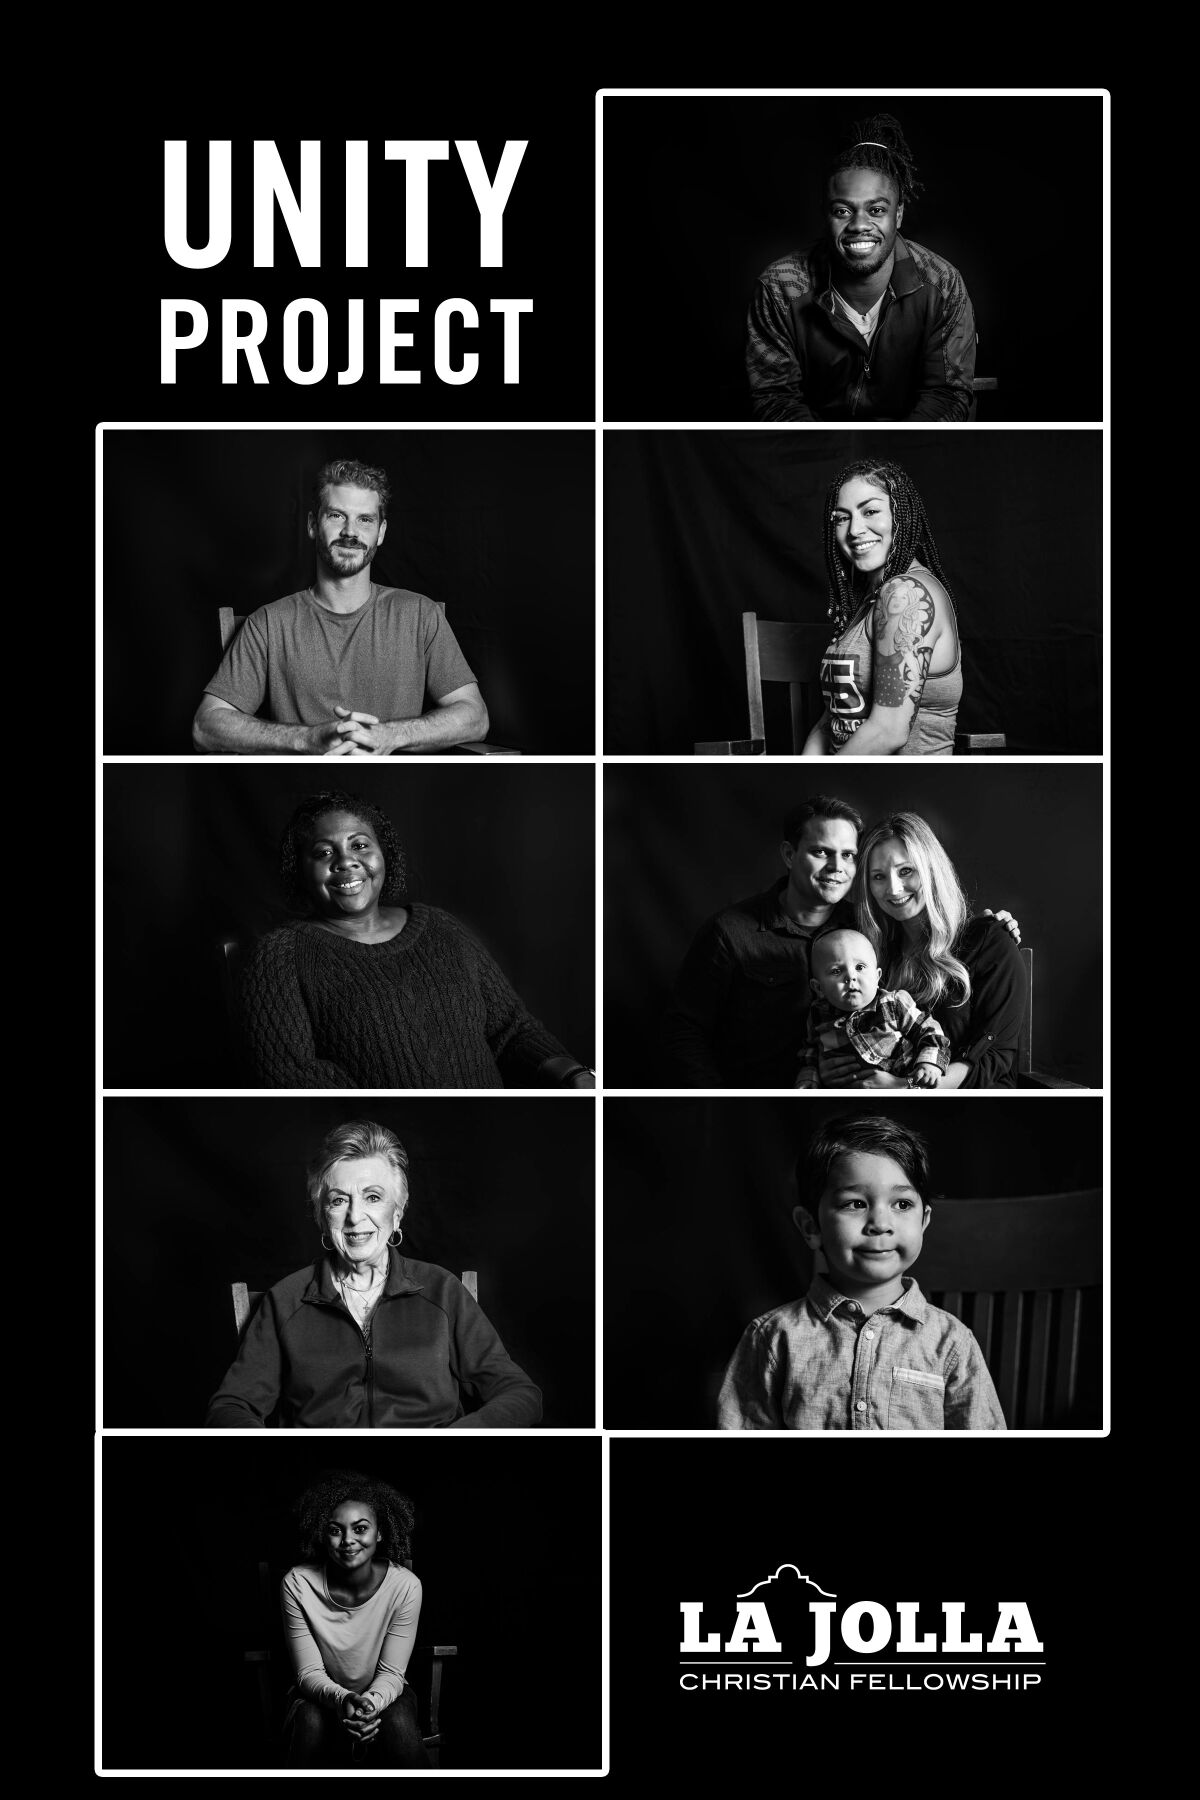 La Jolla Christian Fellowship's "Unity Project" exhibit will feature photos of church members.